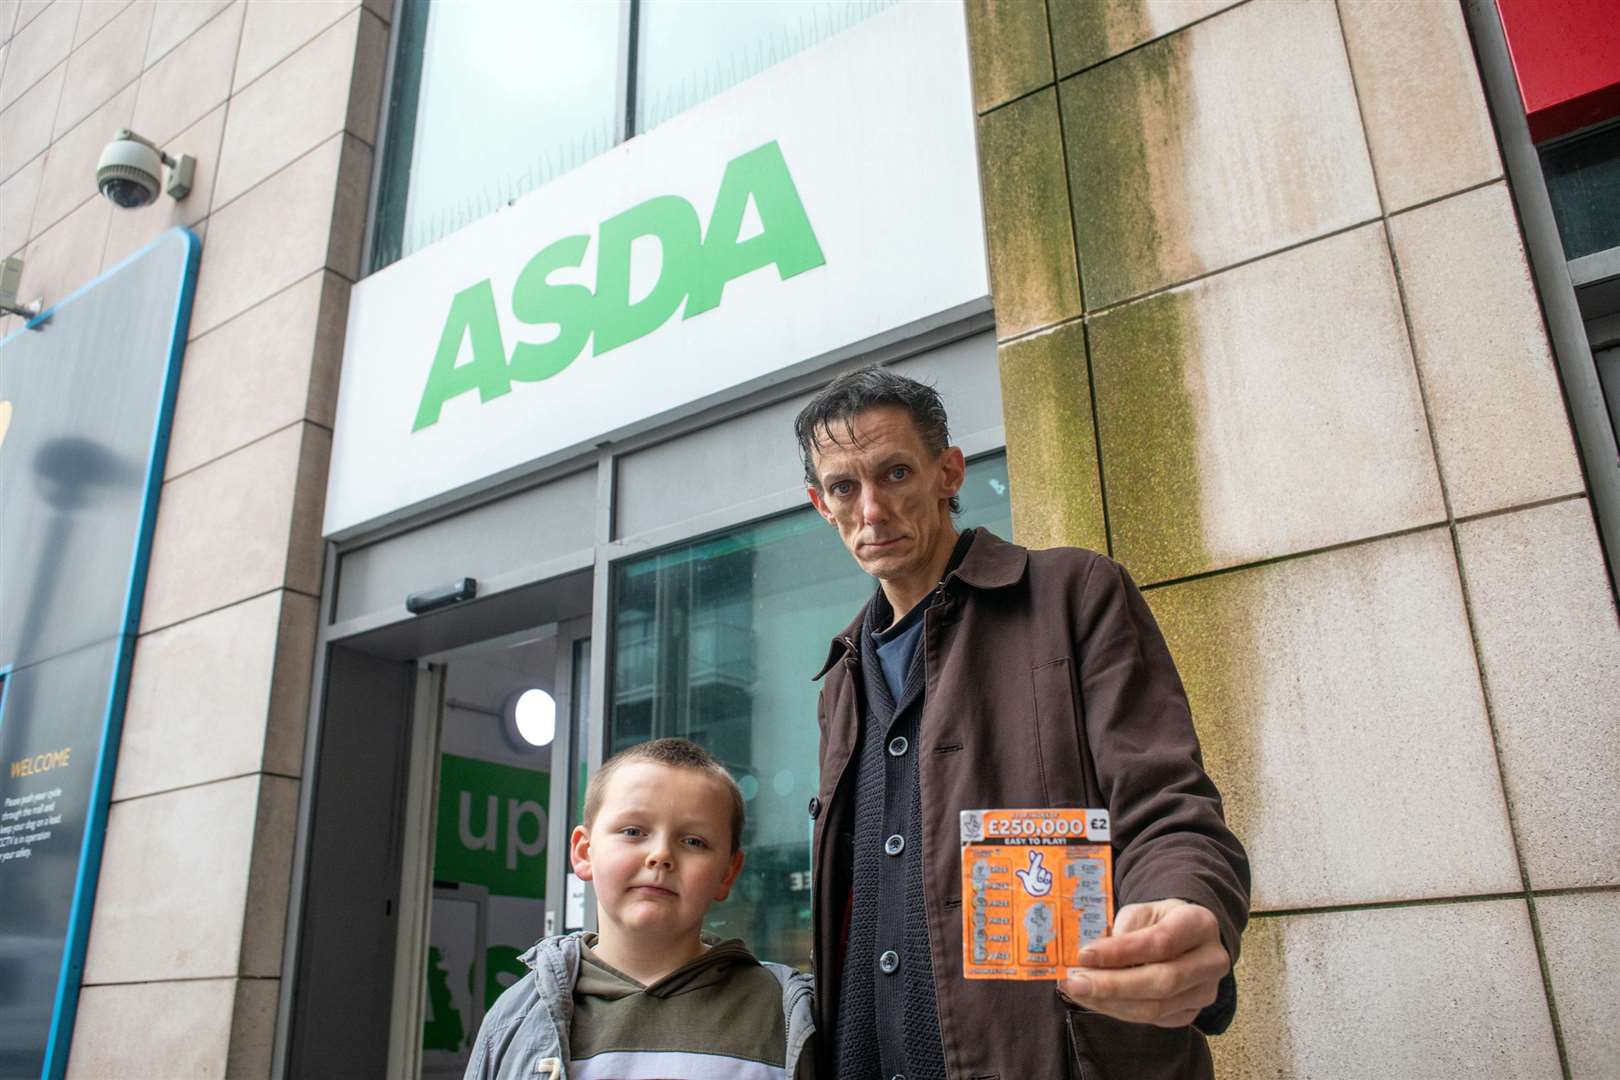 James Fletcher-Retallick and his seven-year-old son Ronnie, stood outside of the Asda in Folkestone that sold Ronnie a scratch card. Picture: SWNS